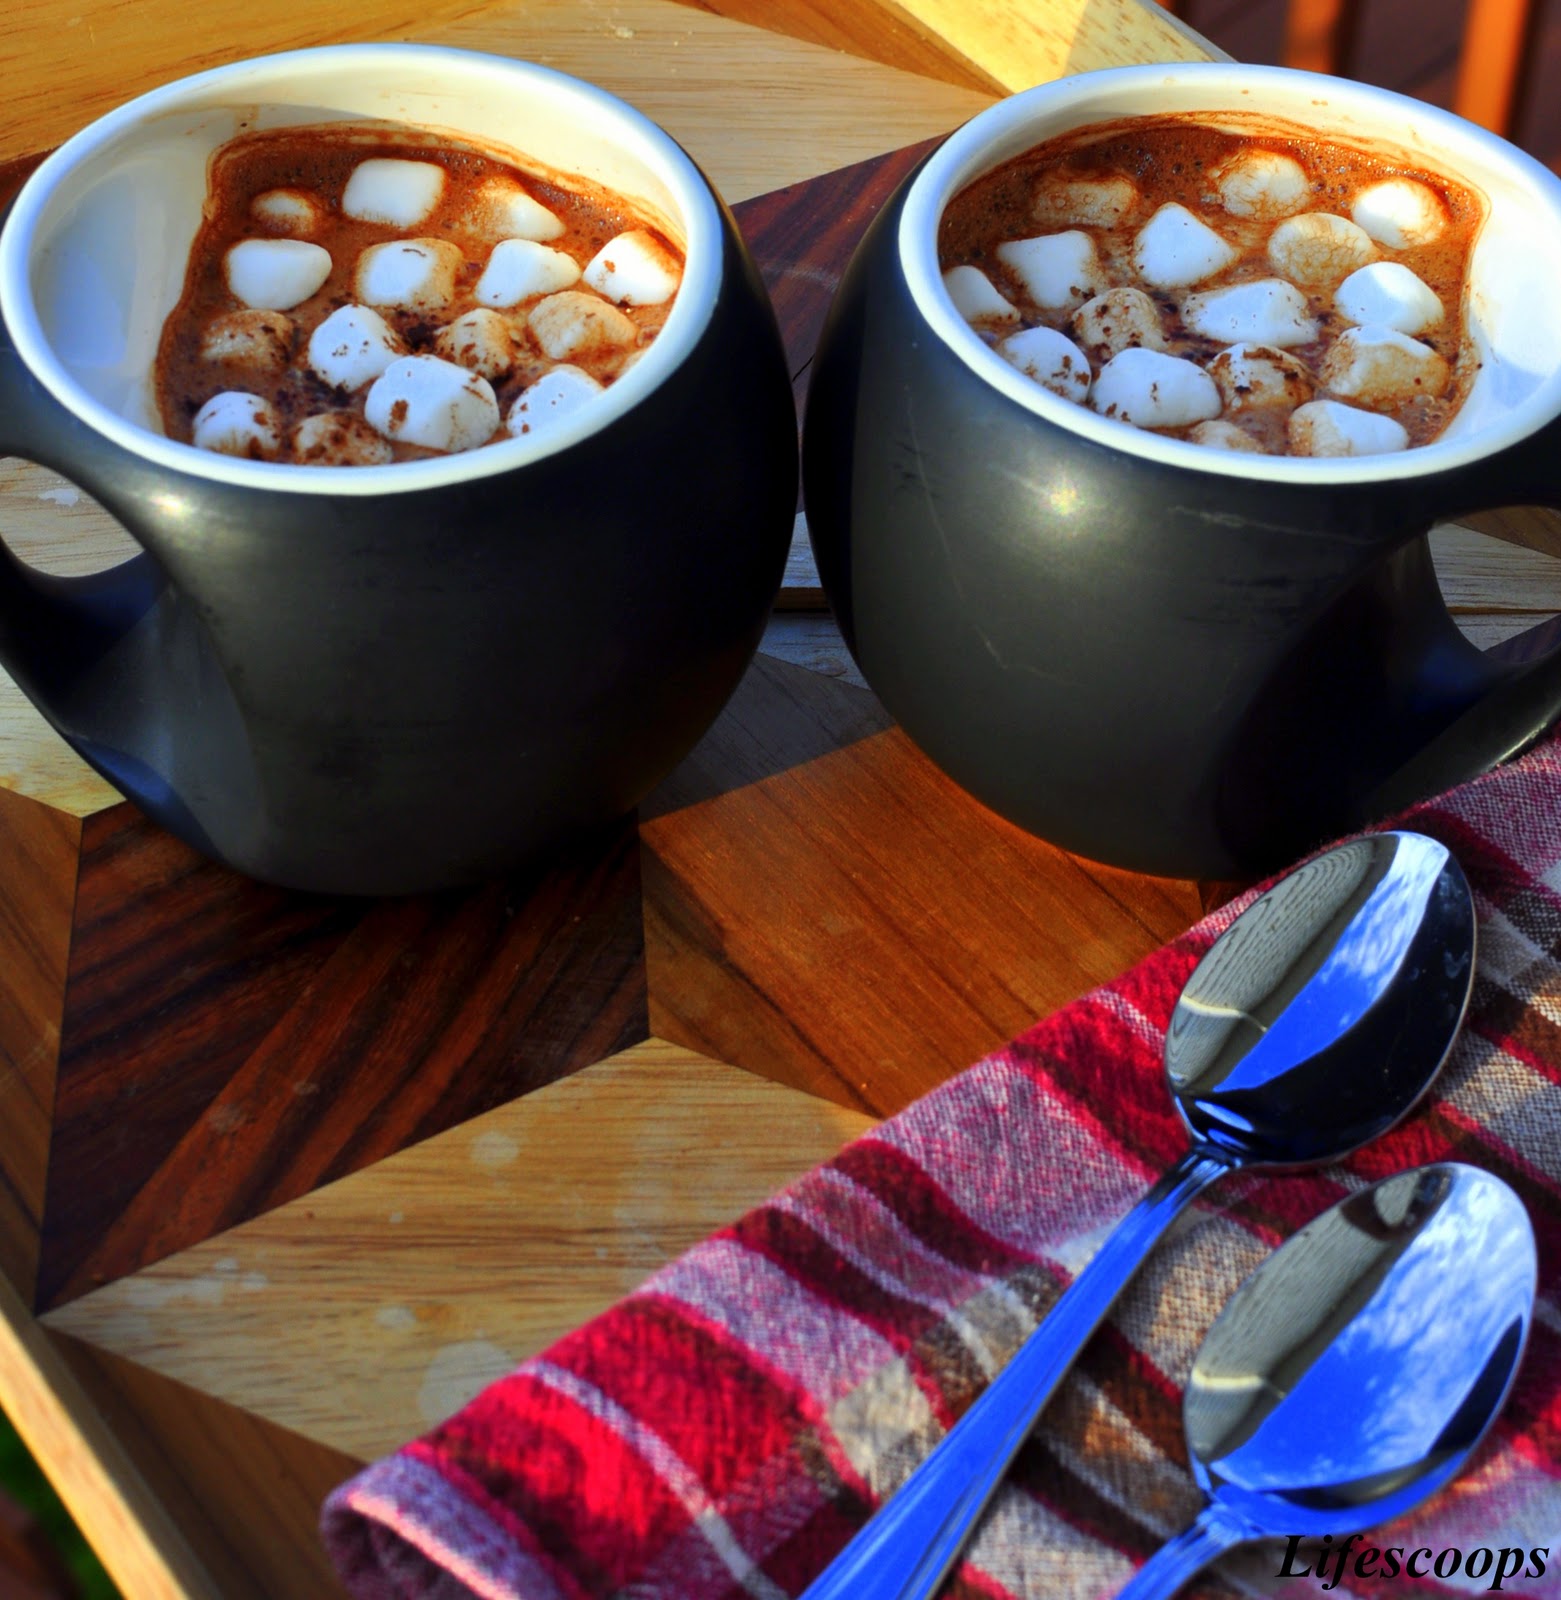 Life Scoops Hot Chocolate With Marshmallows And Baileys Chocolate Liquor